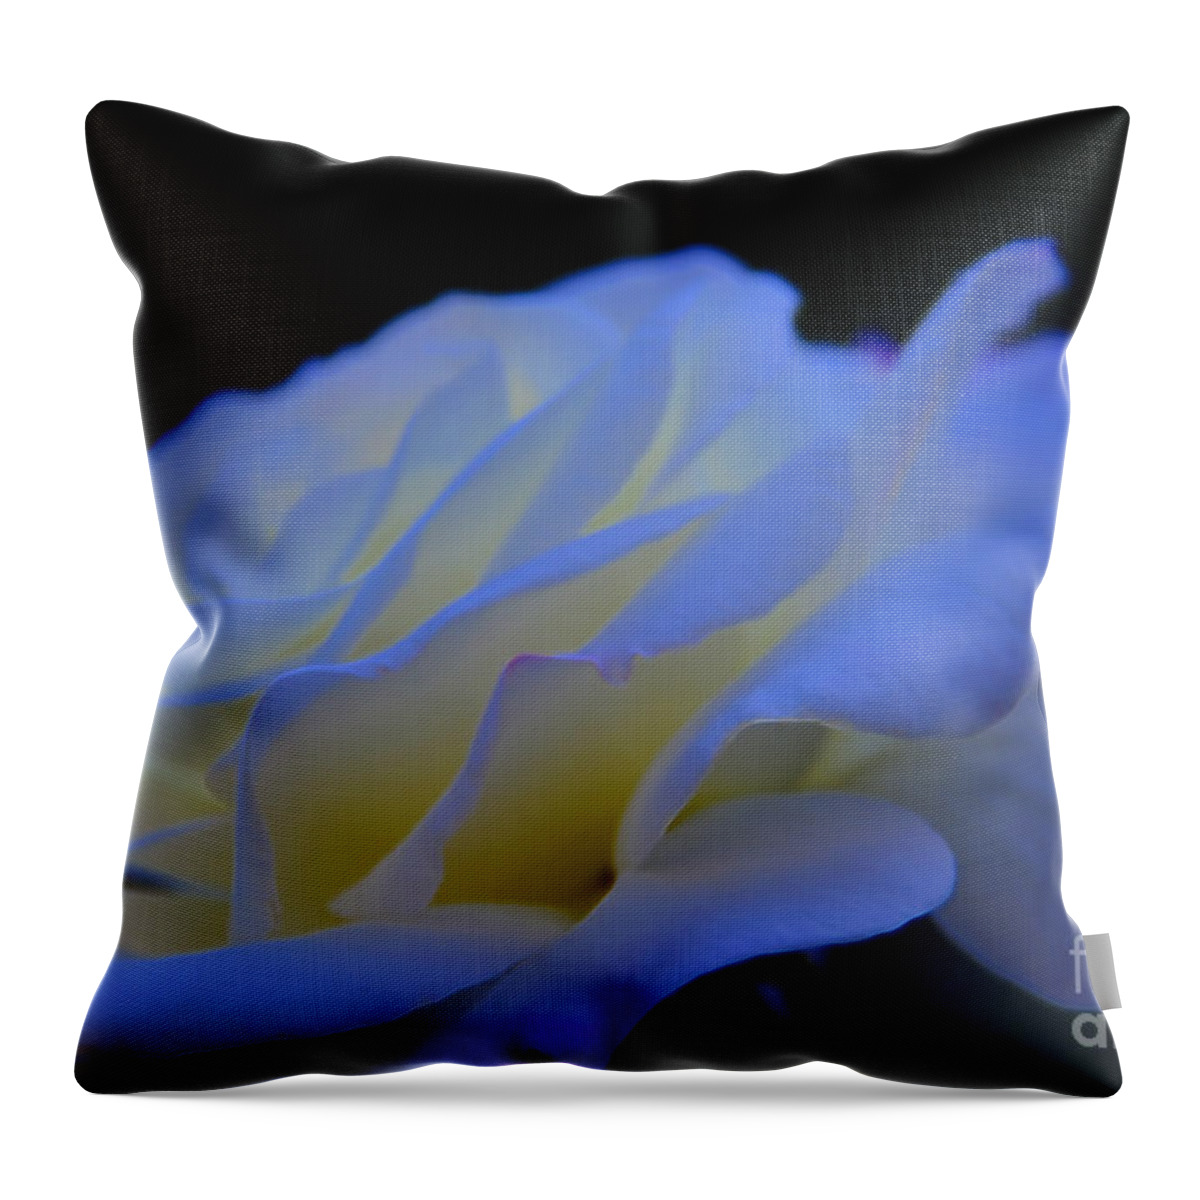 Rose Throw Pillow featuring the photograph White Rose by Elaine Hunter